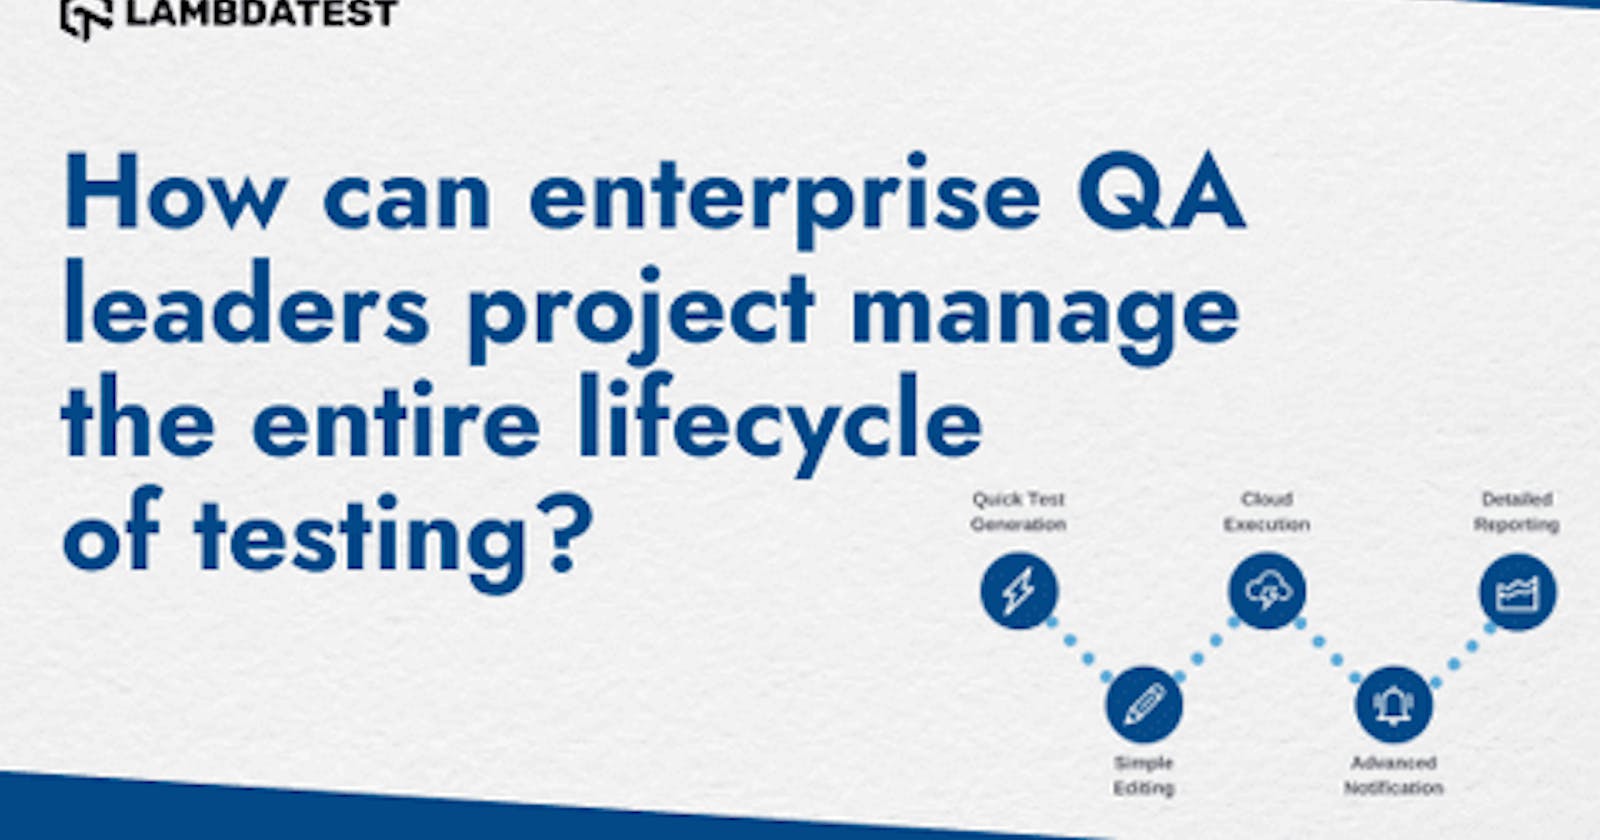 How can enterprise QA leaders project manage the entire lifecycle of testing?